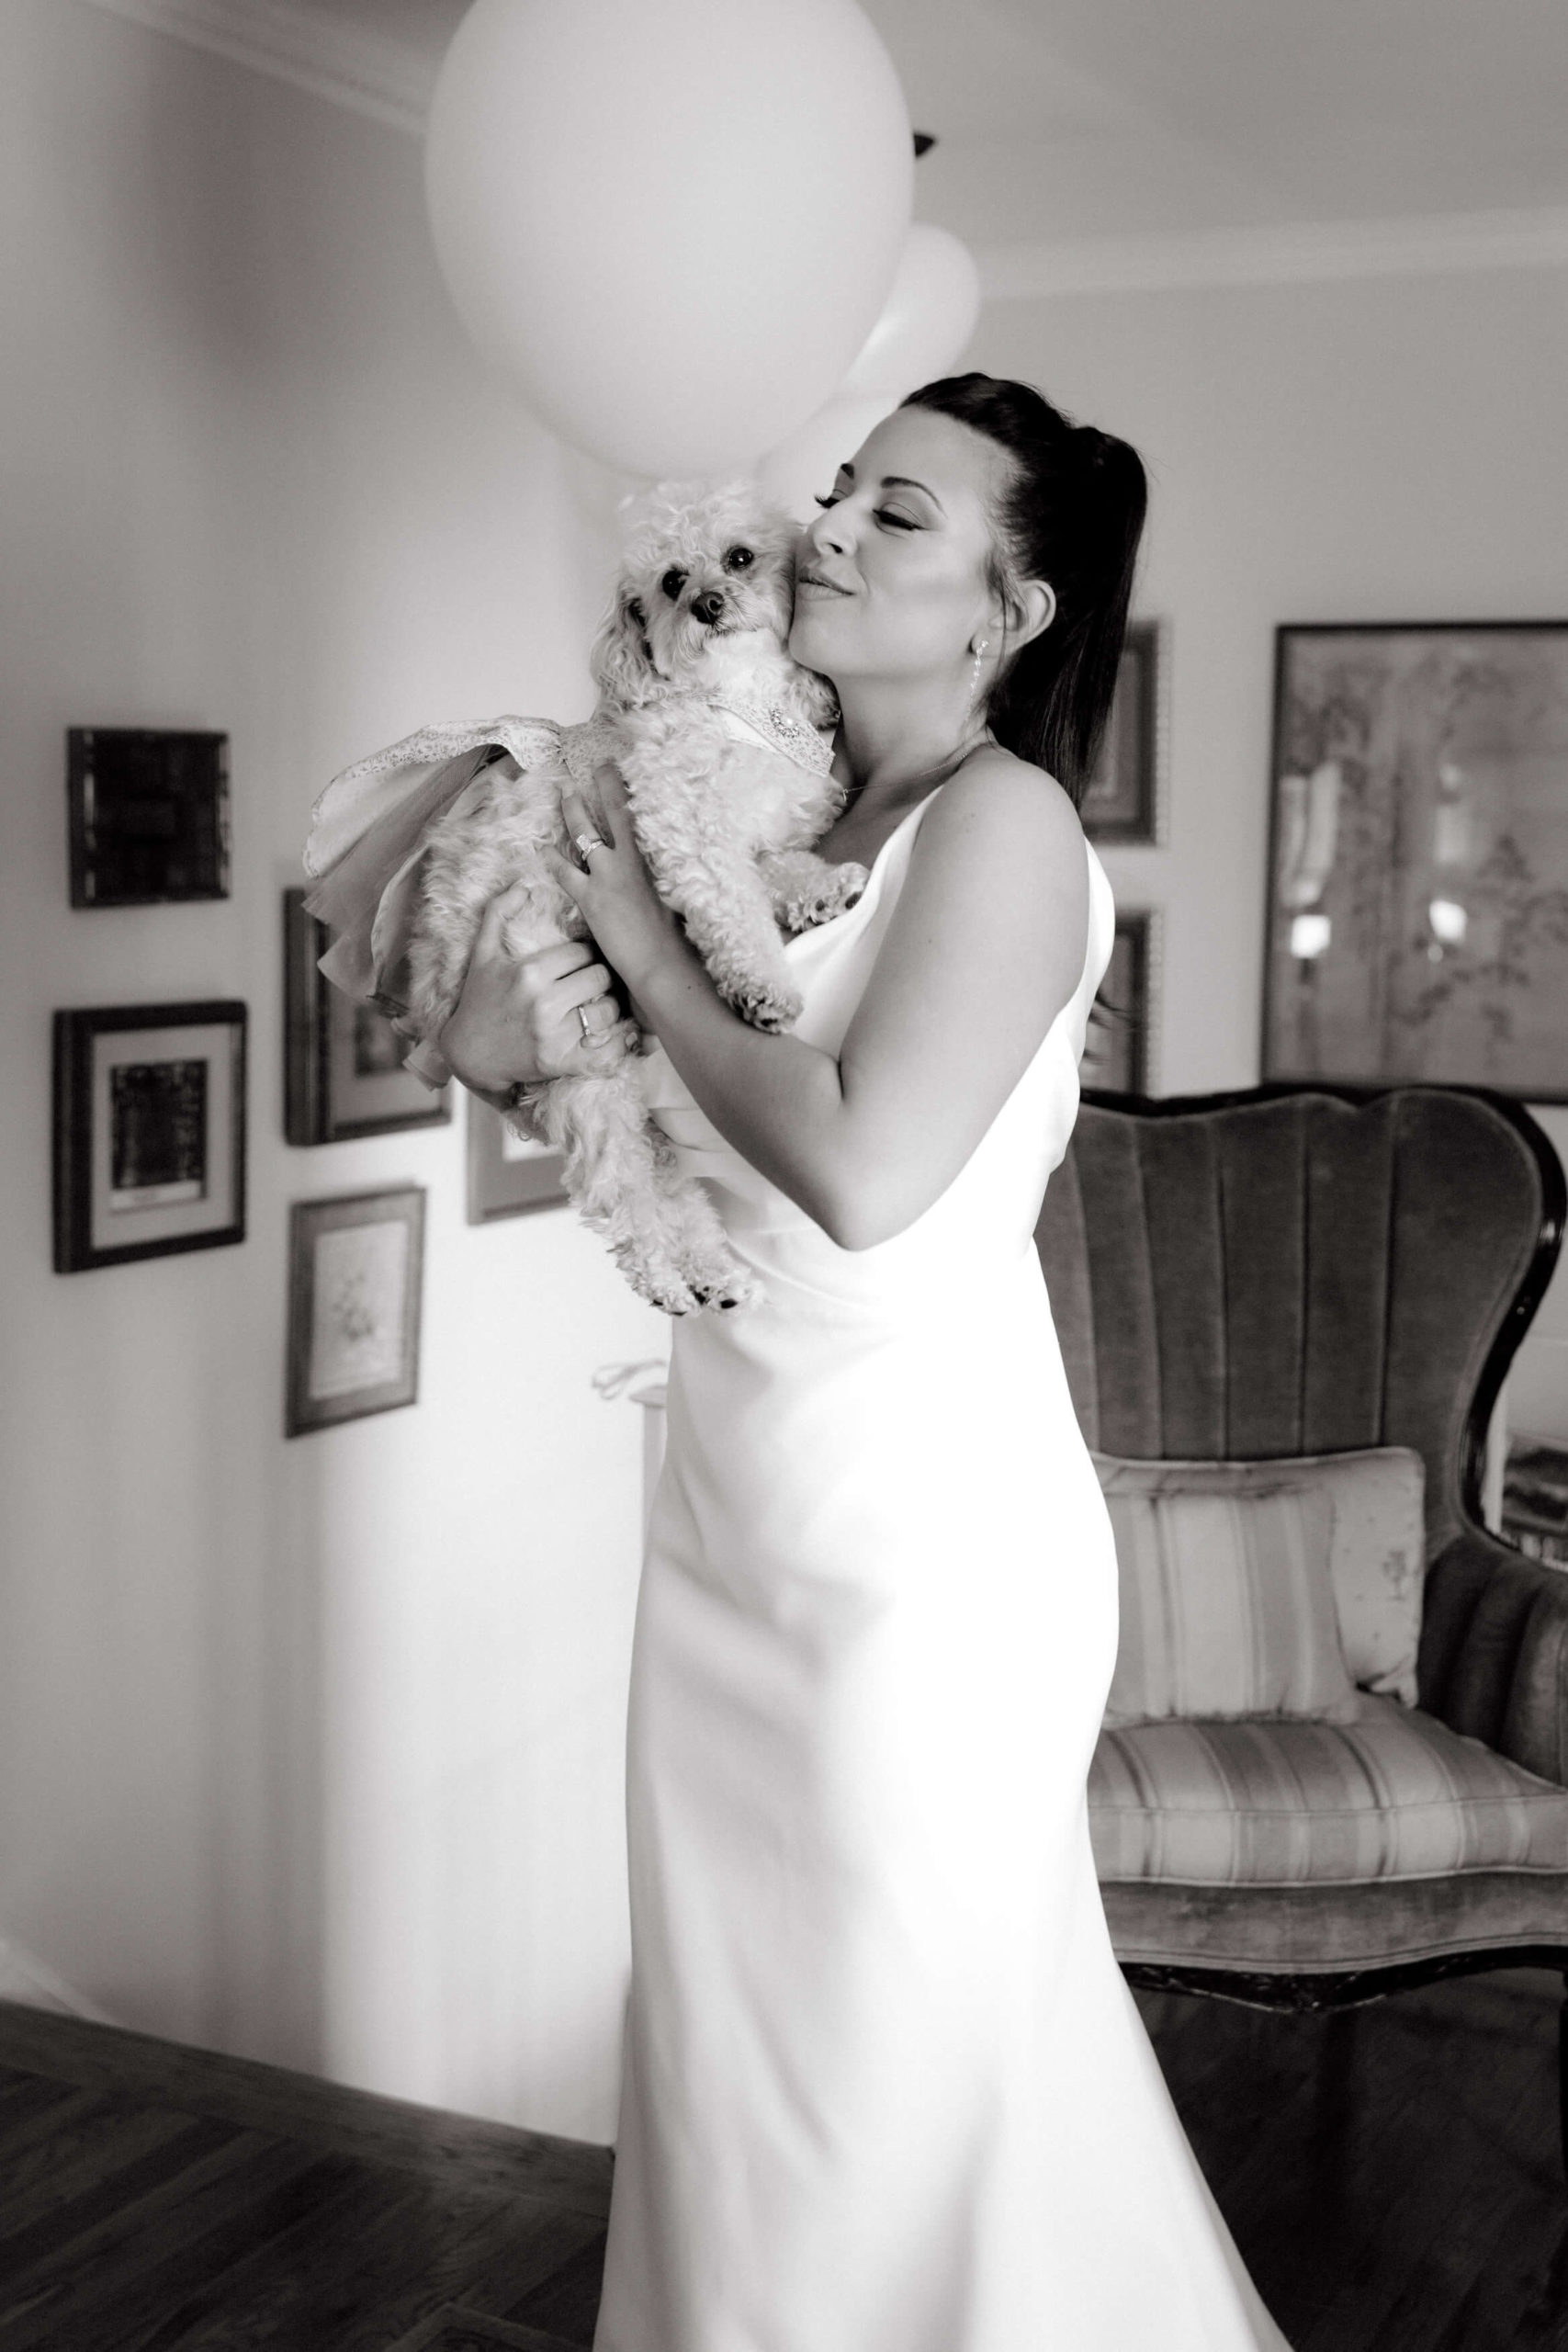 Editorial photo of the bride cuddling her dog. NYC wedding with your pet image by Jenny Fu Studio